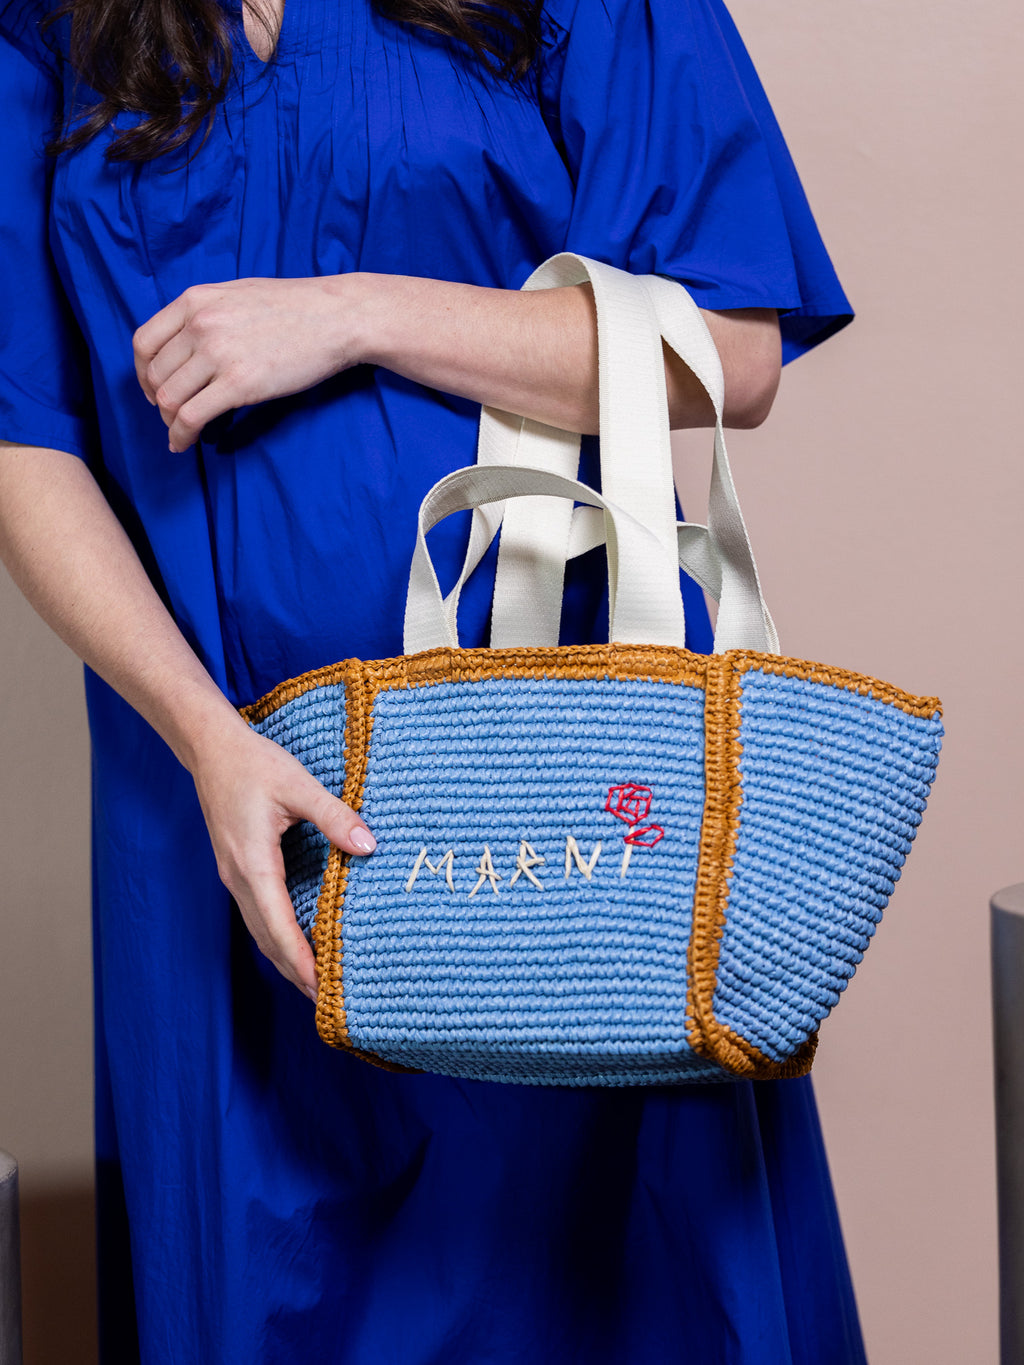 Woman in blue dress holding blue bag